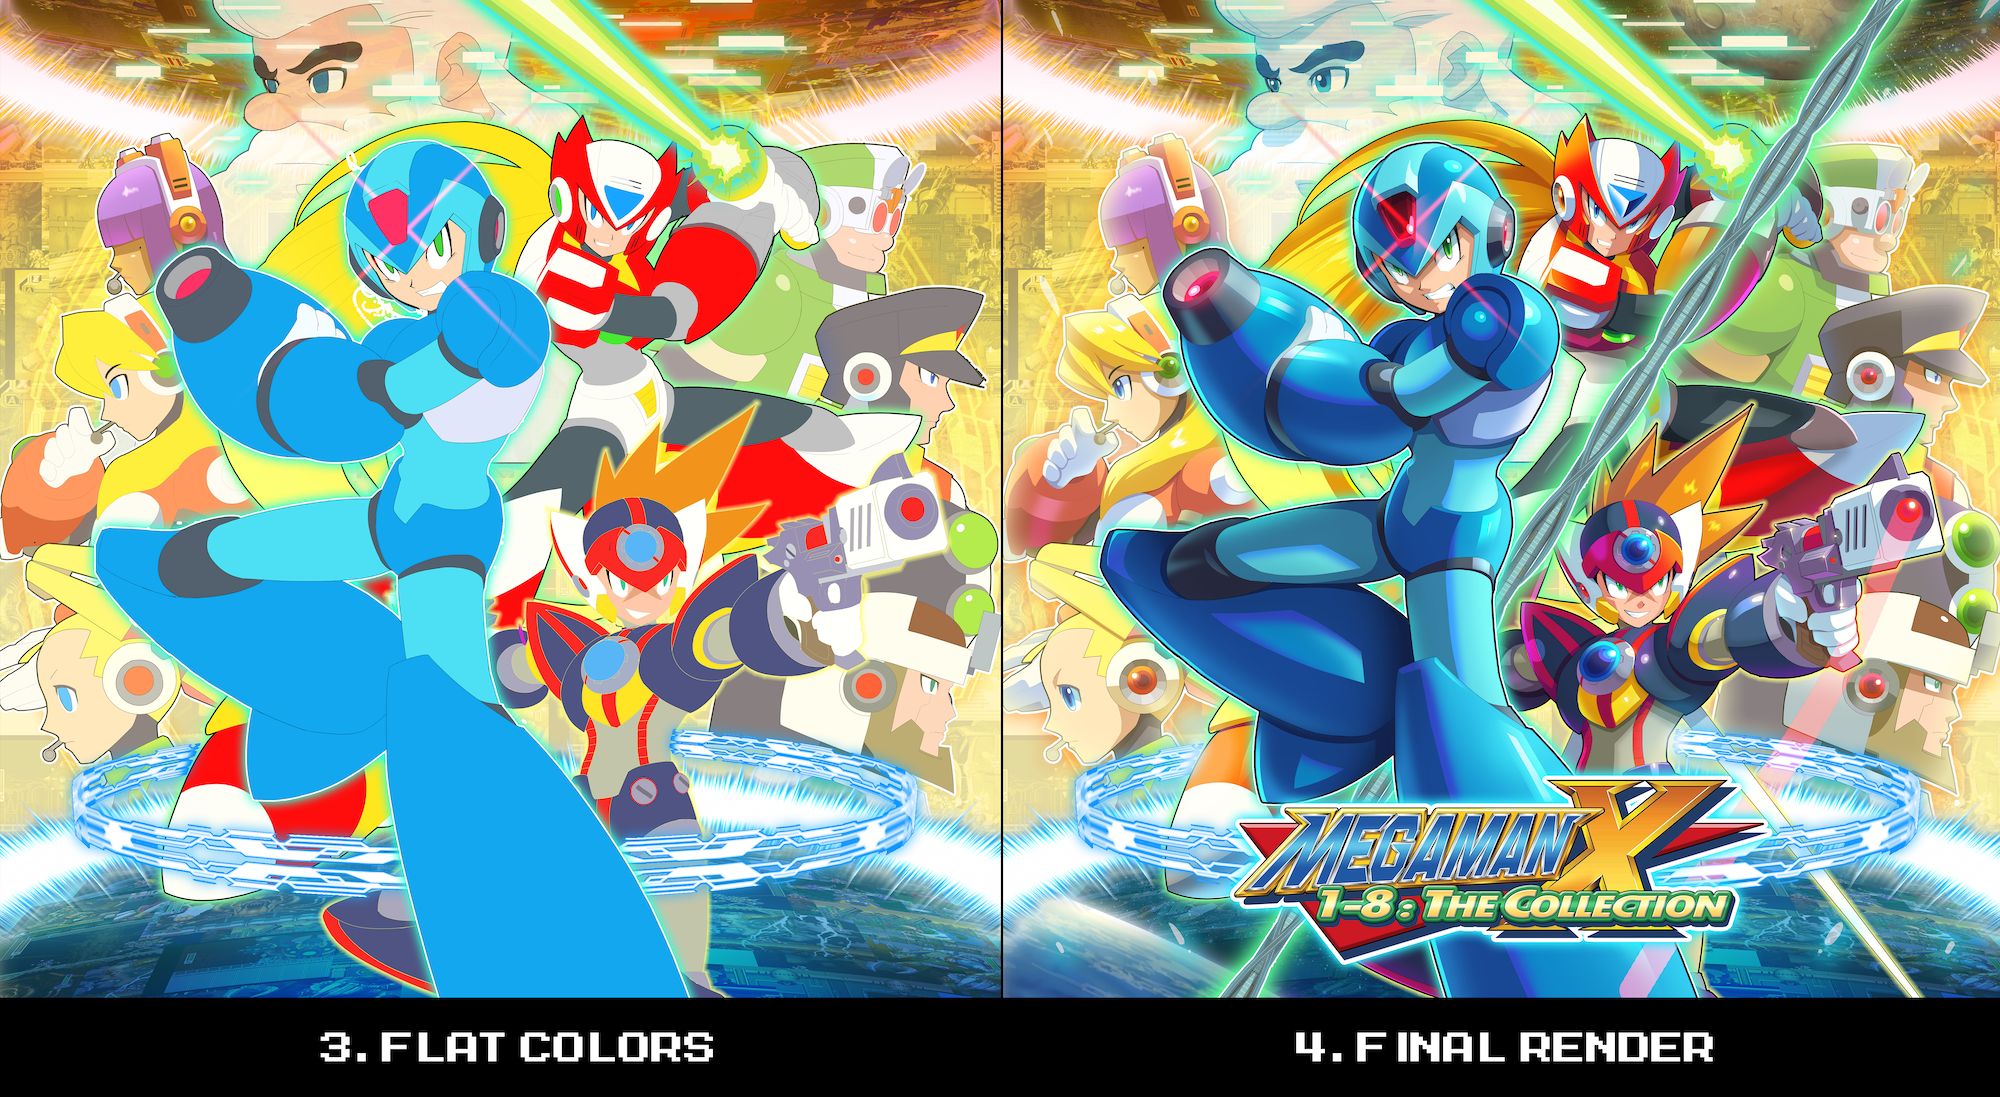 Art by ultimatemaverickx for the Mega Man X 1-8: The Collection vinyl box set available from Lacedrecords.com